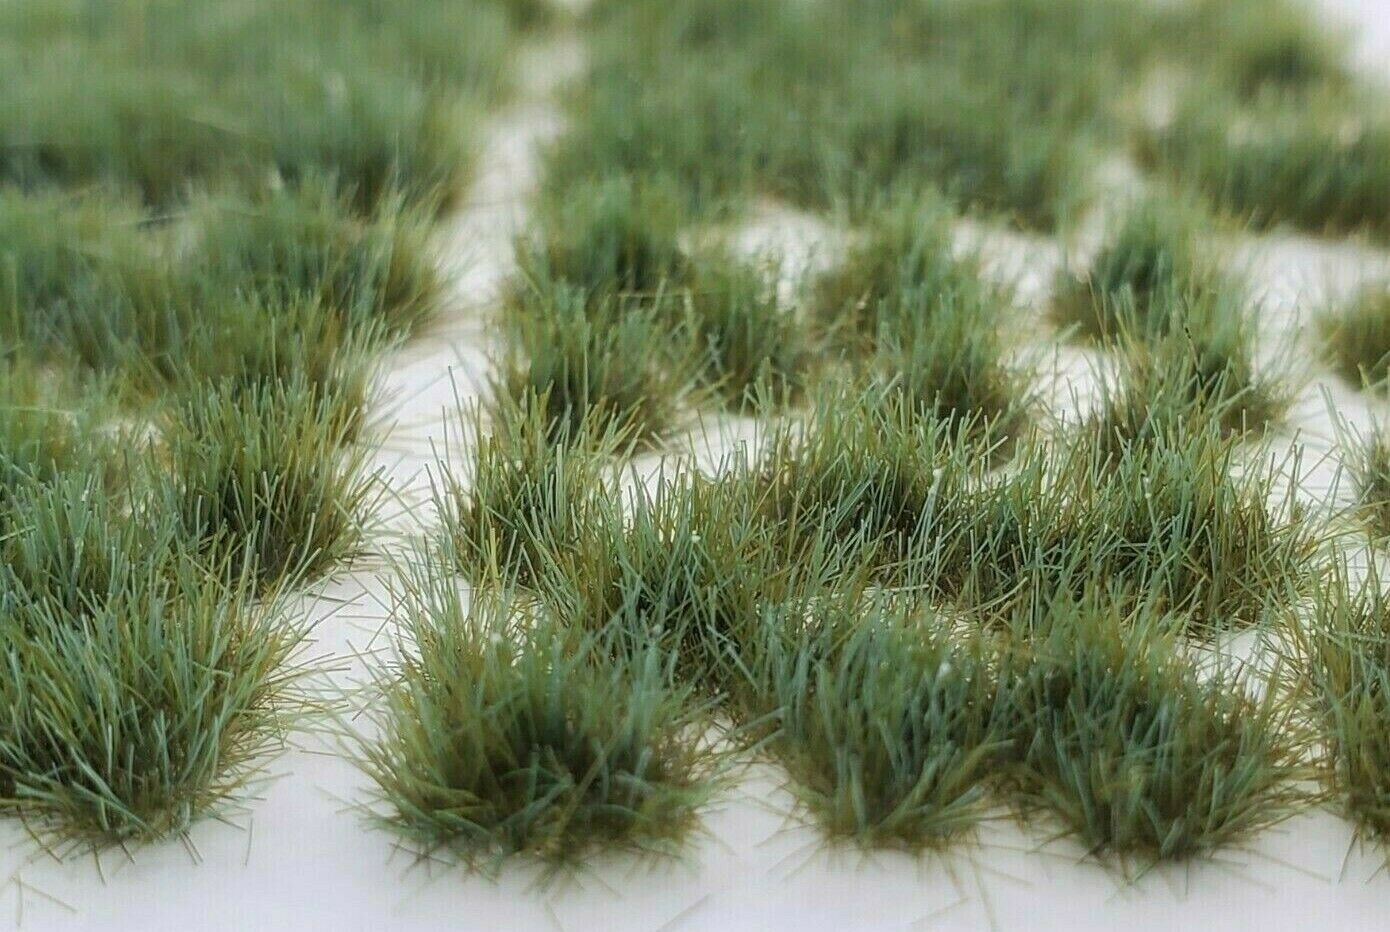 Self Adhesive Static Grass Tufts For Wargaming Terrain/bases -forest Green- 4mm